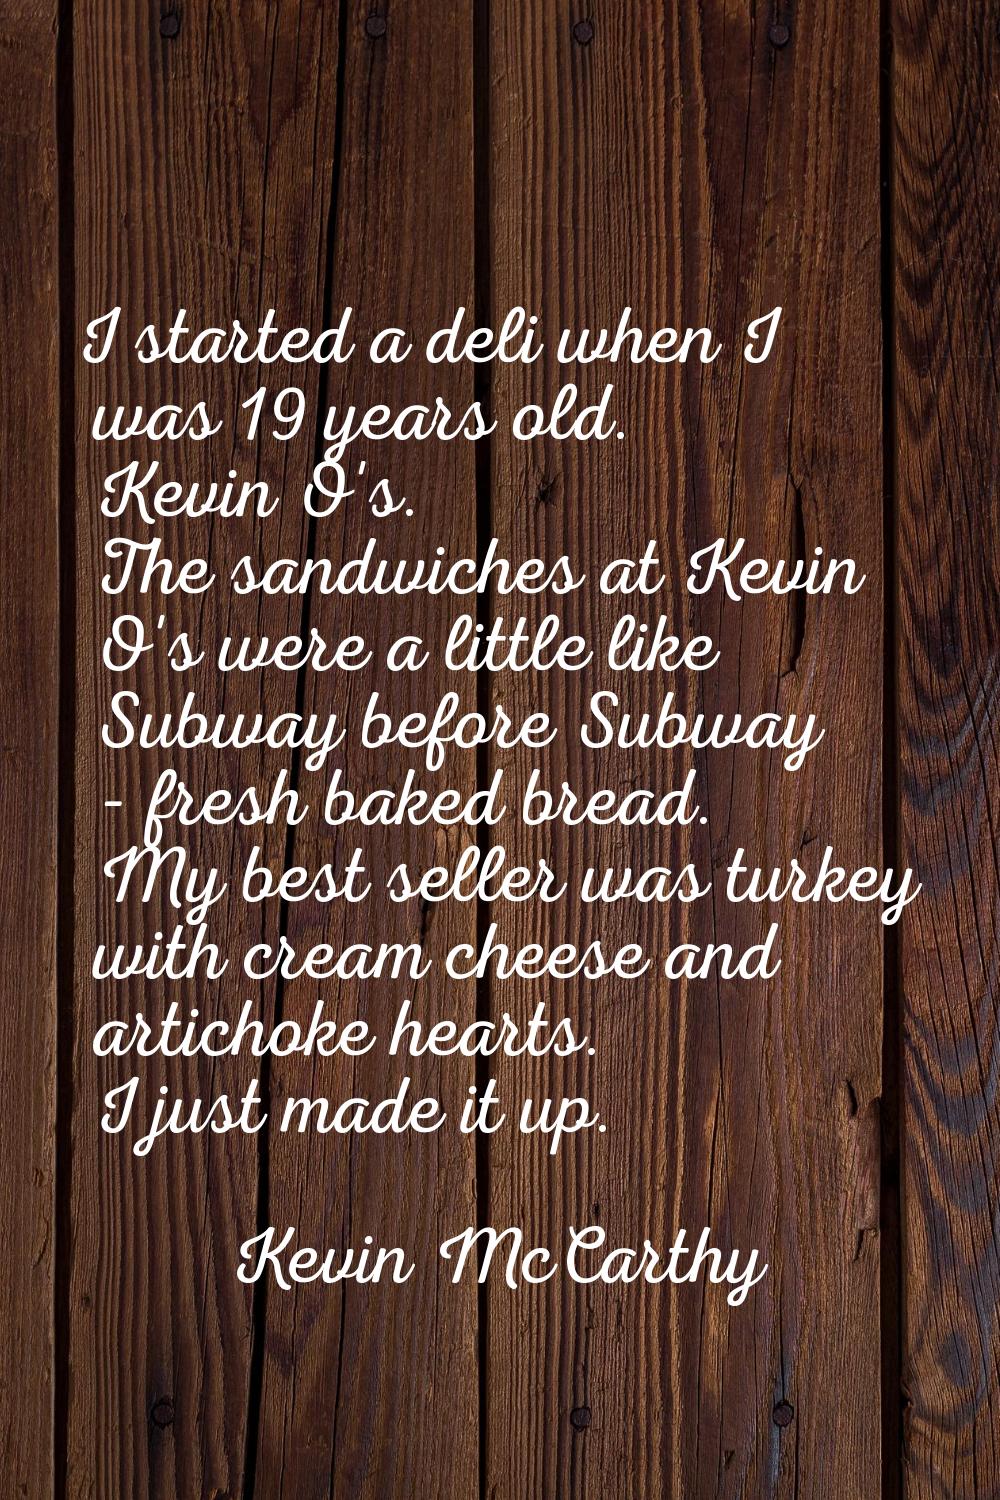 I started a deli when I was 19 years old. Kevin O's. The sandwiches at Kevin O's were a little like